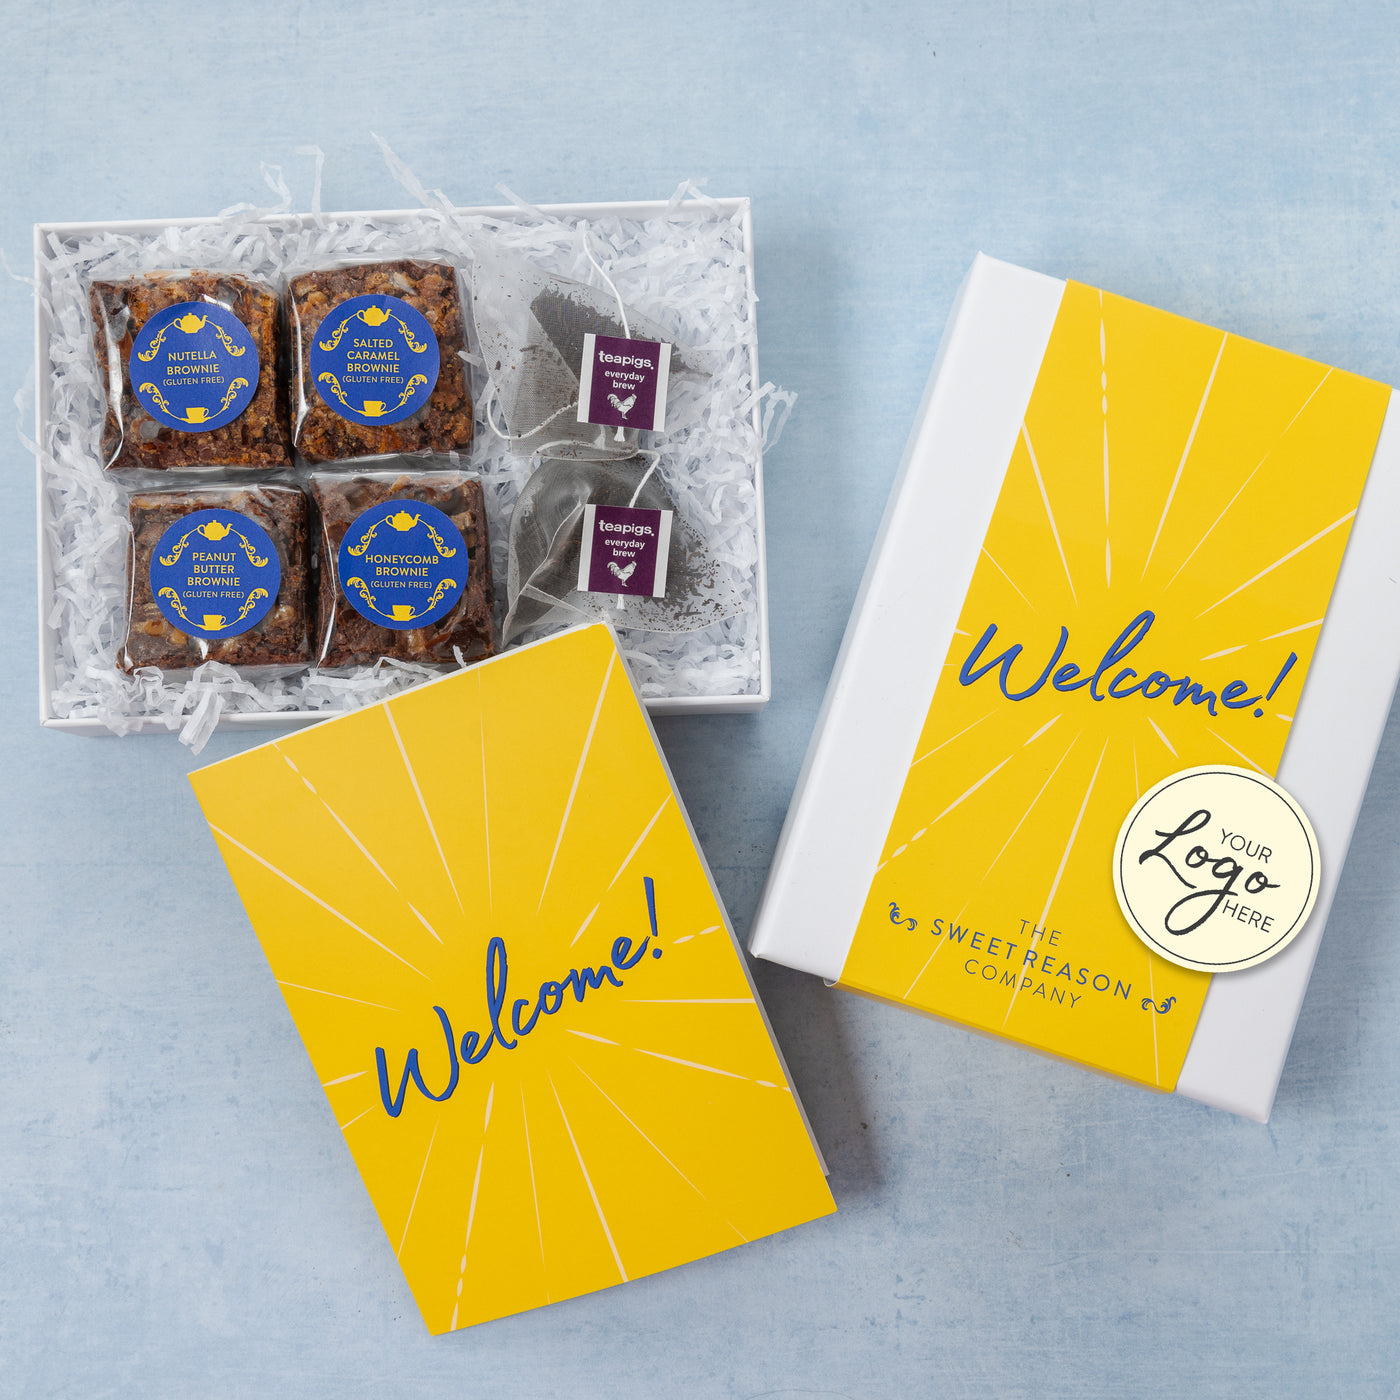 Branded & personalised 'Welcome!' Gluten Free Afternoon Tea for Two Gift